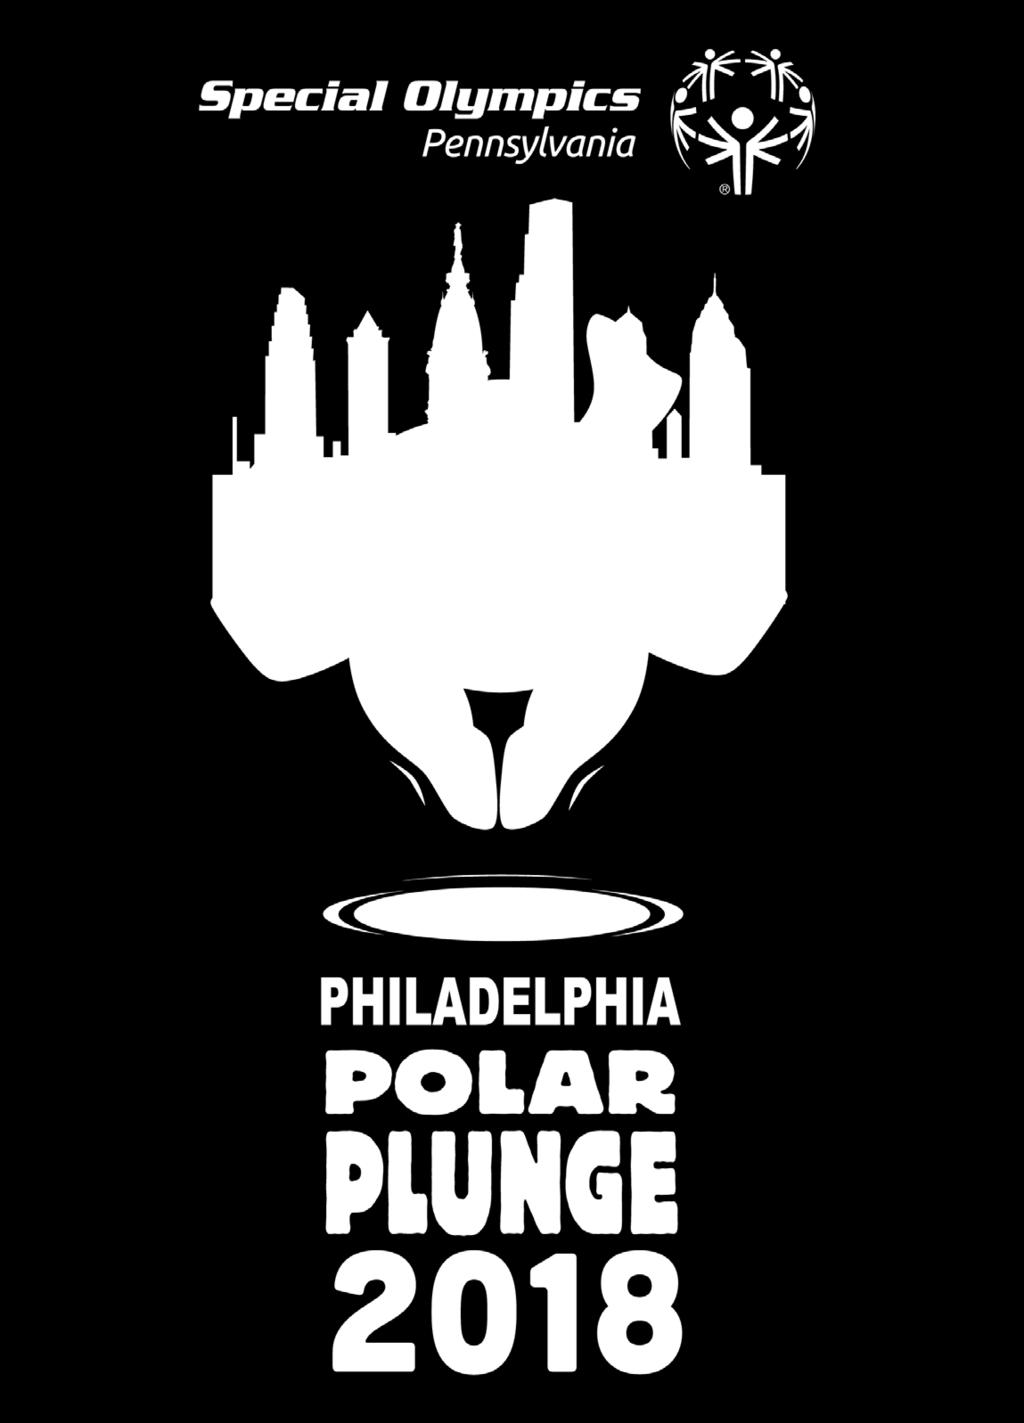 Funds raised from the plunge support operating costs for the nearly 1,000 athletes that participate in Special Olympics activities across the city of Brotherly Love.